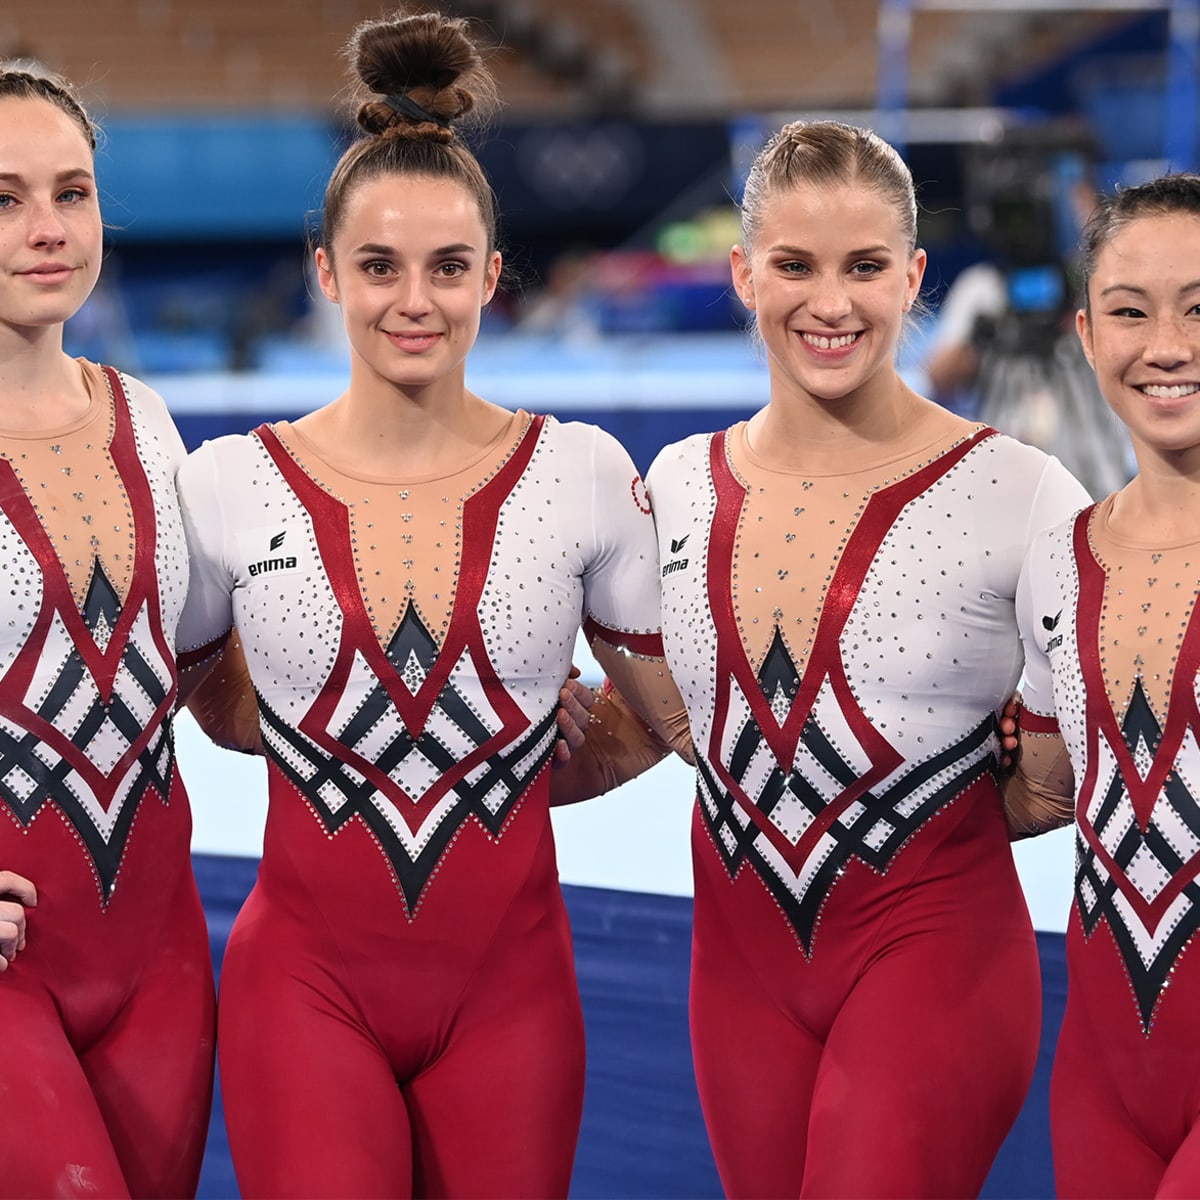 Olympics Germany Gymnastics Team Wears Unitards Tired Of Sexualization Sports Illustrated